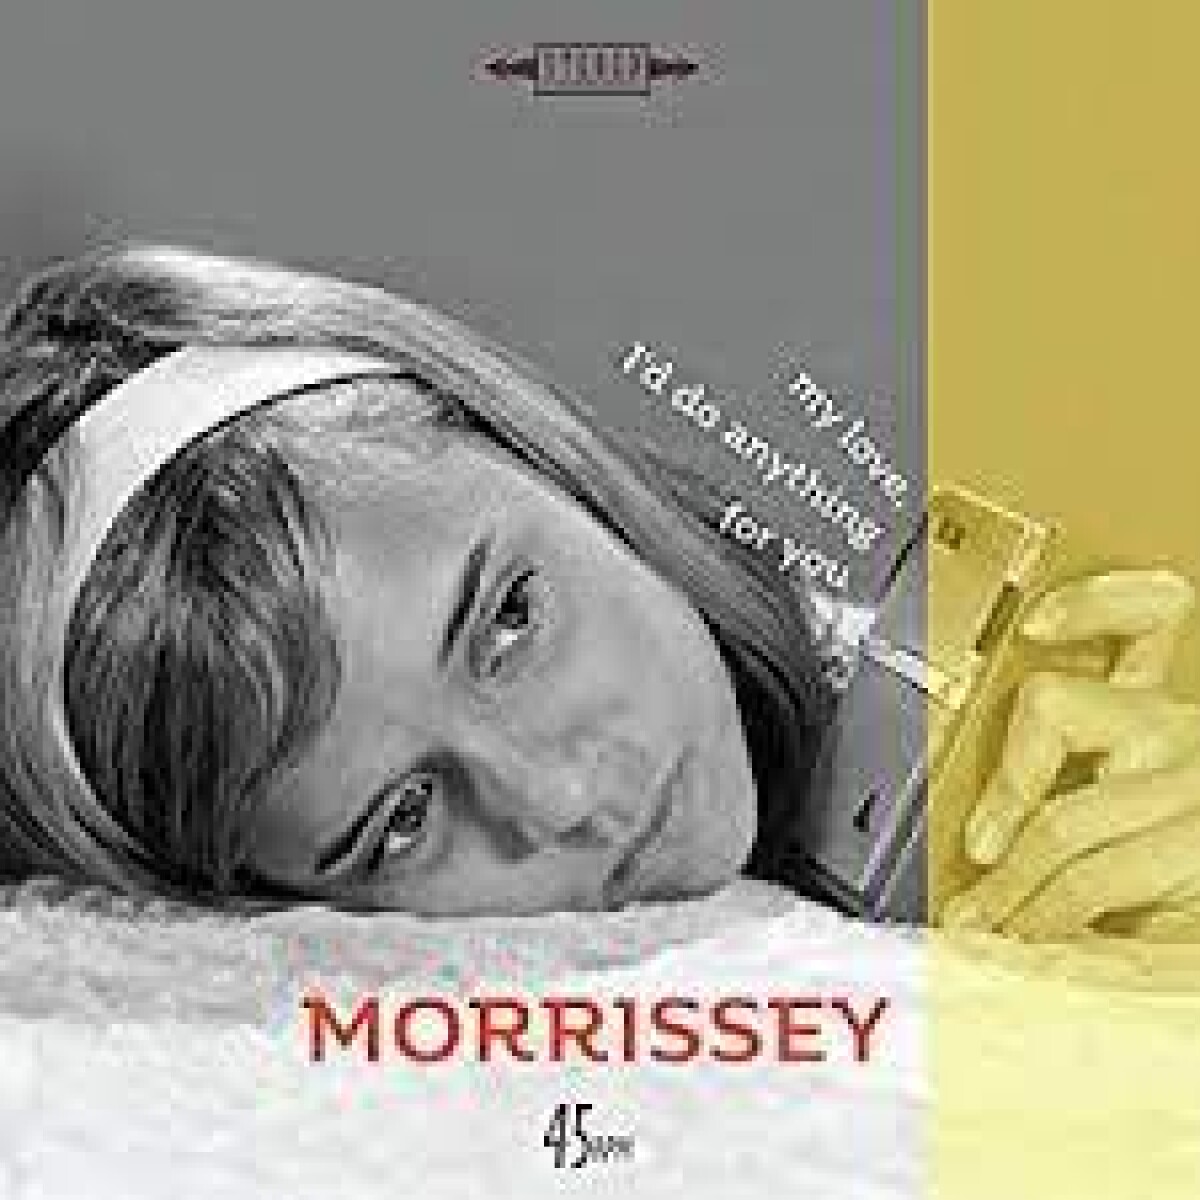 (l) Morrisey - My Love I Do Anything For You - Vinilo 